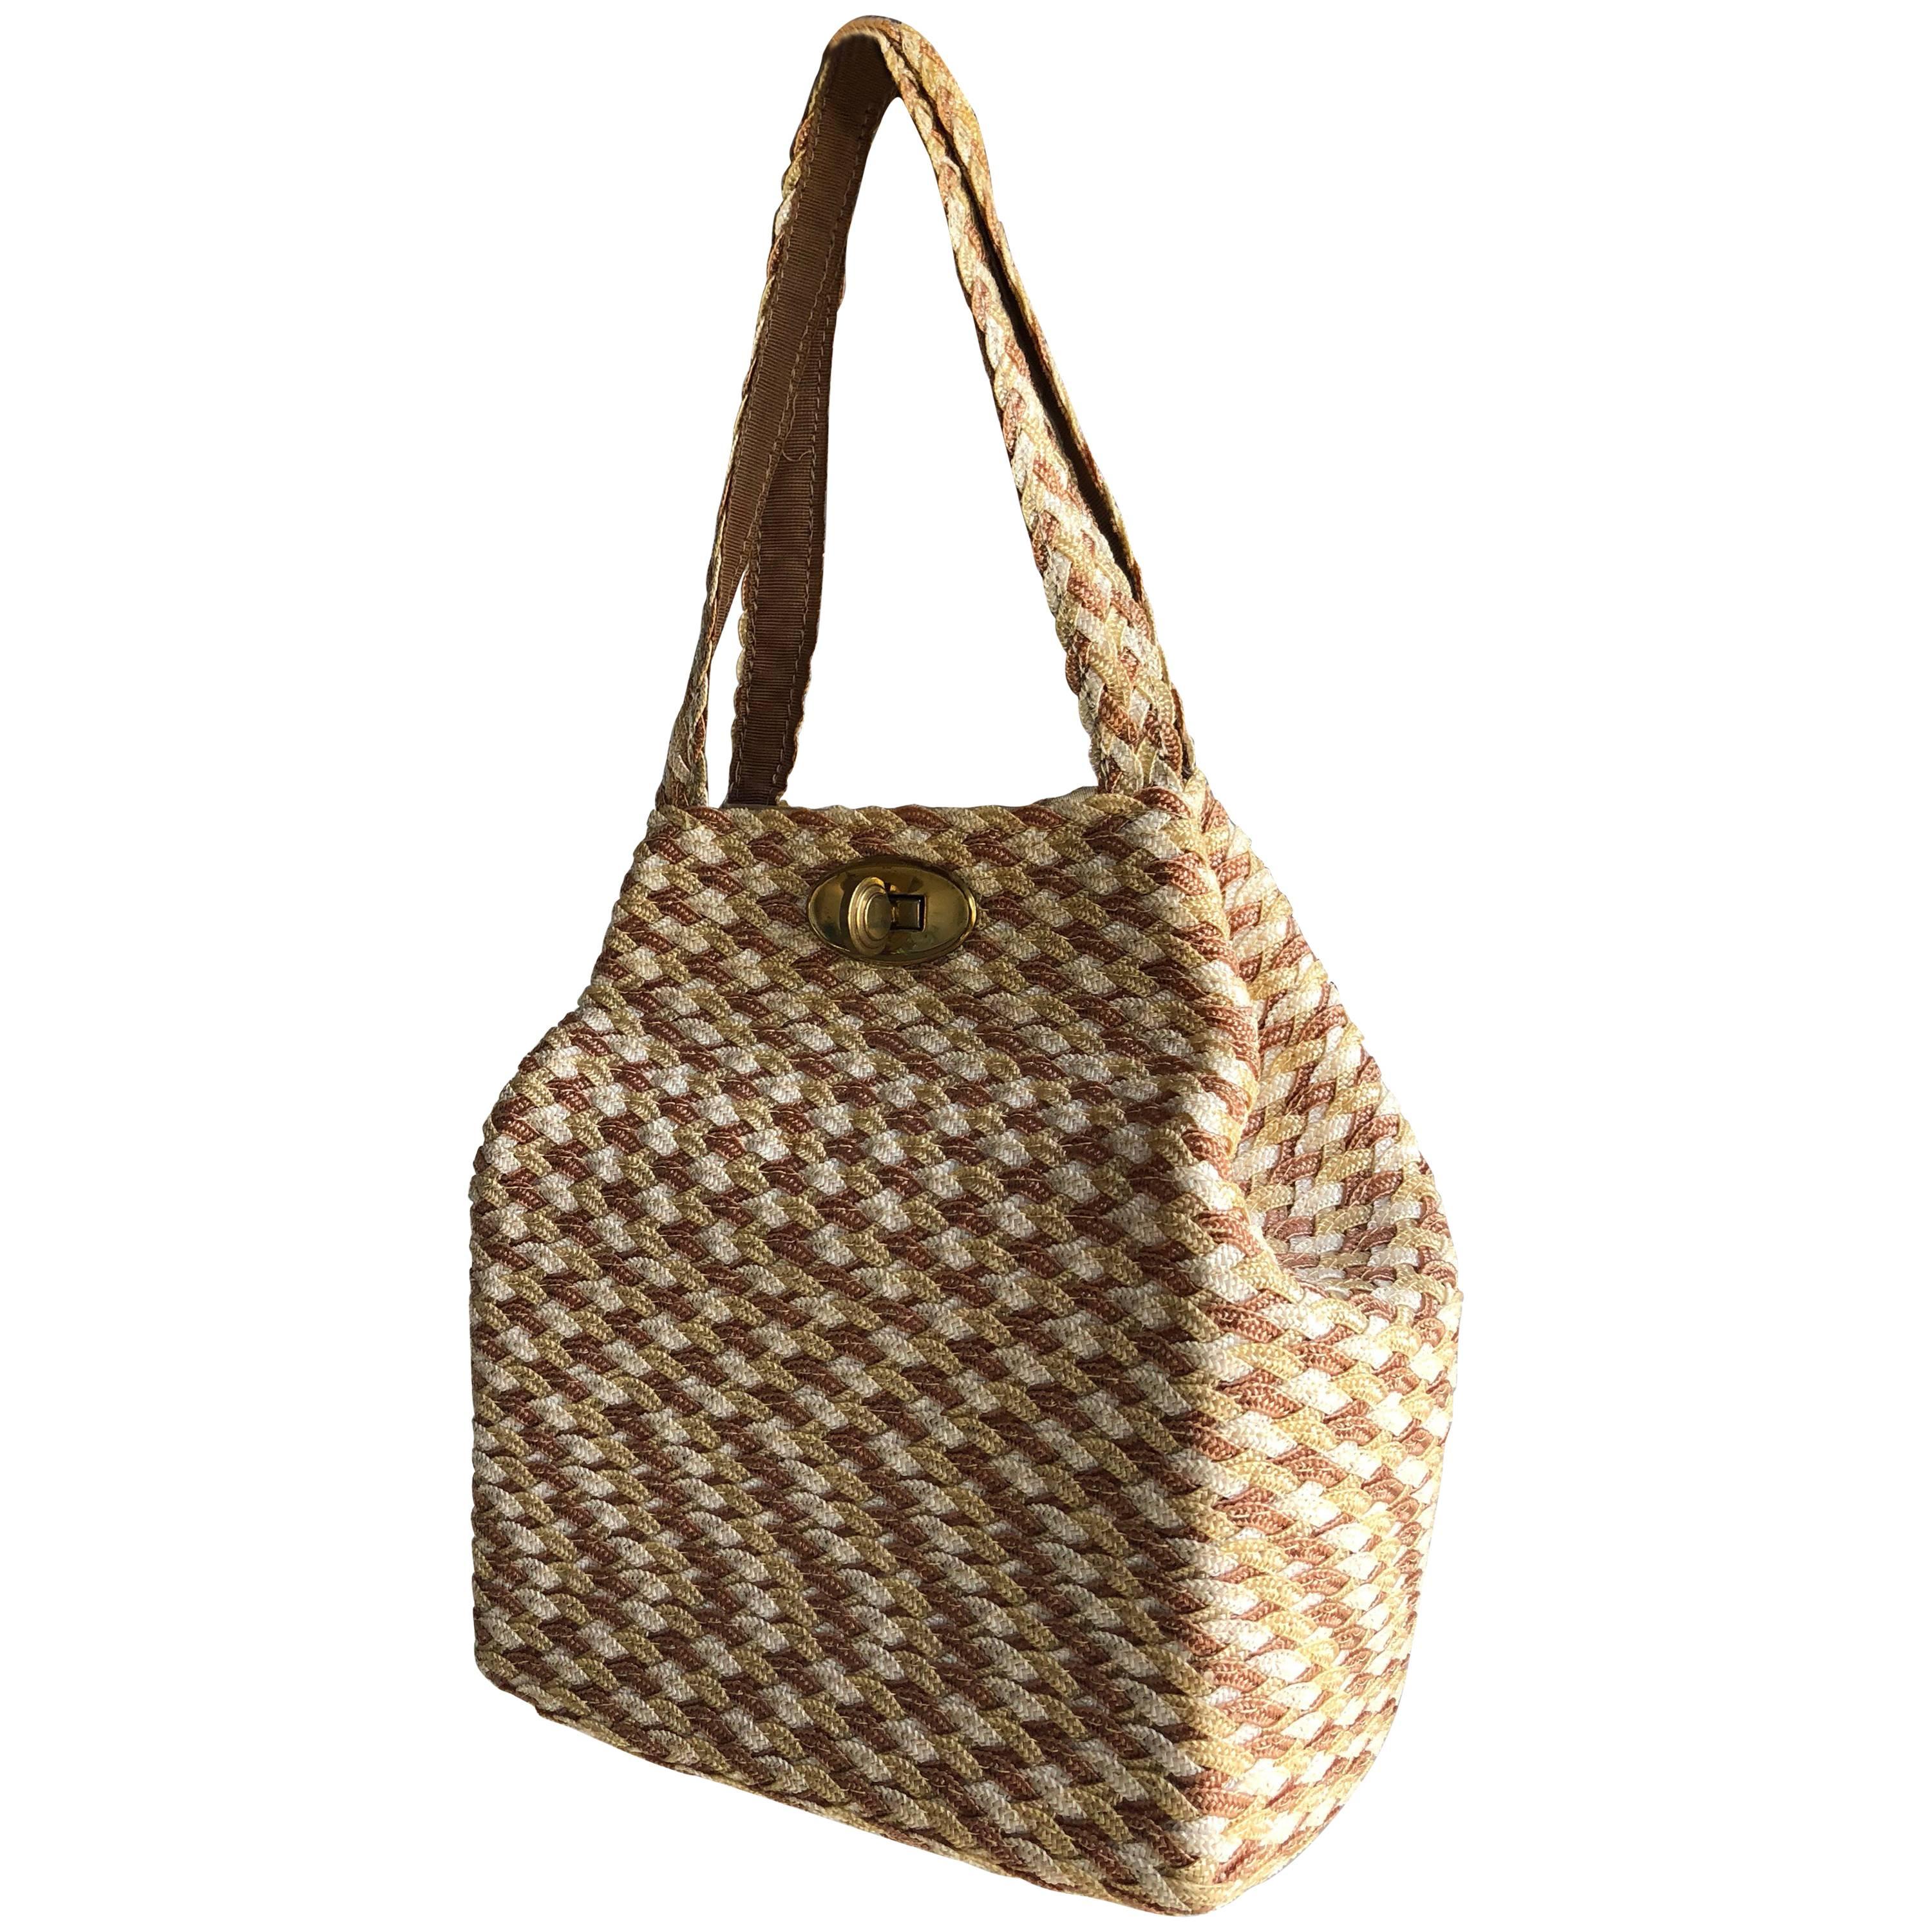 Tri-Tone Straw Woven Square Structured Handbag With Brass Toggle Closure, 1950s For Sale